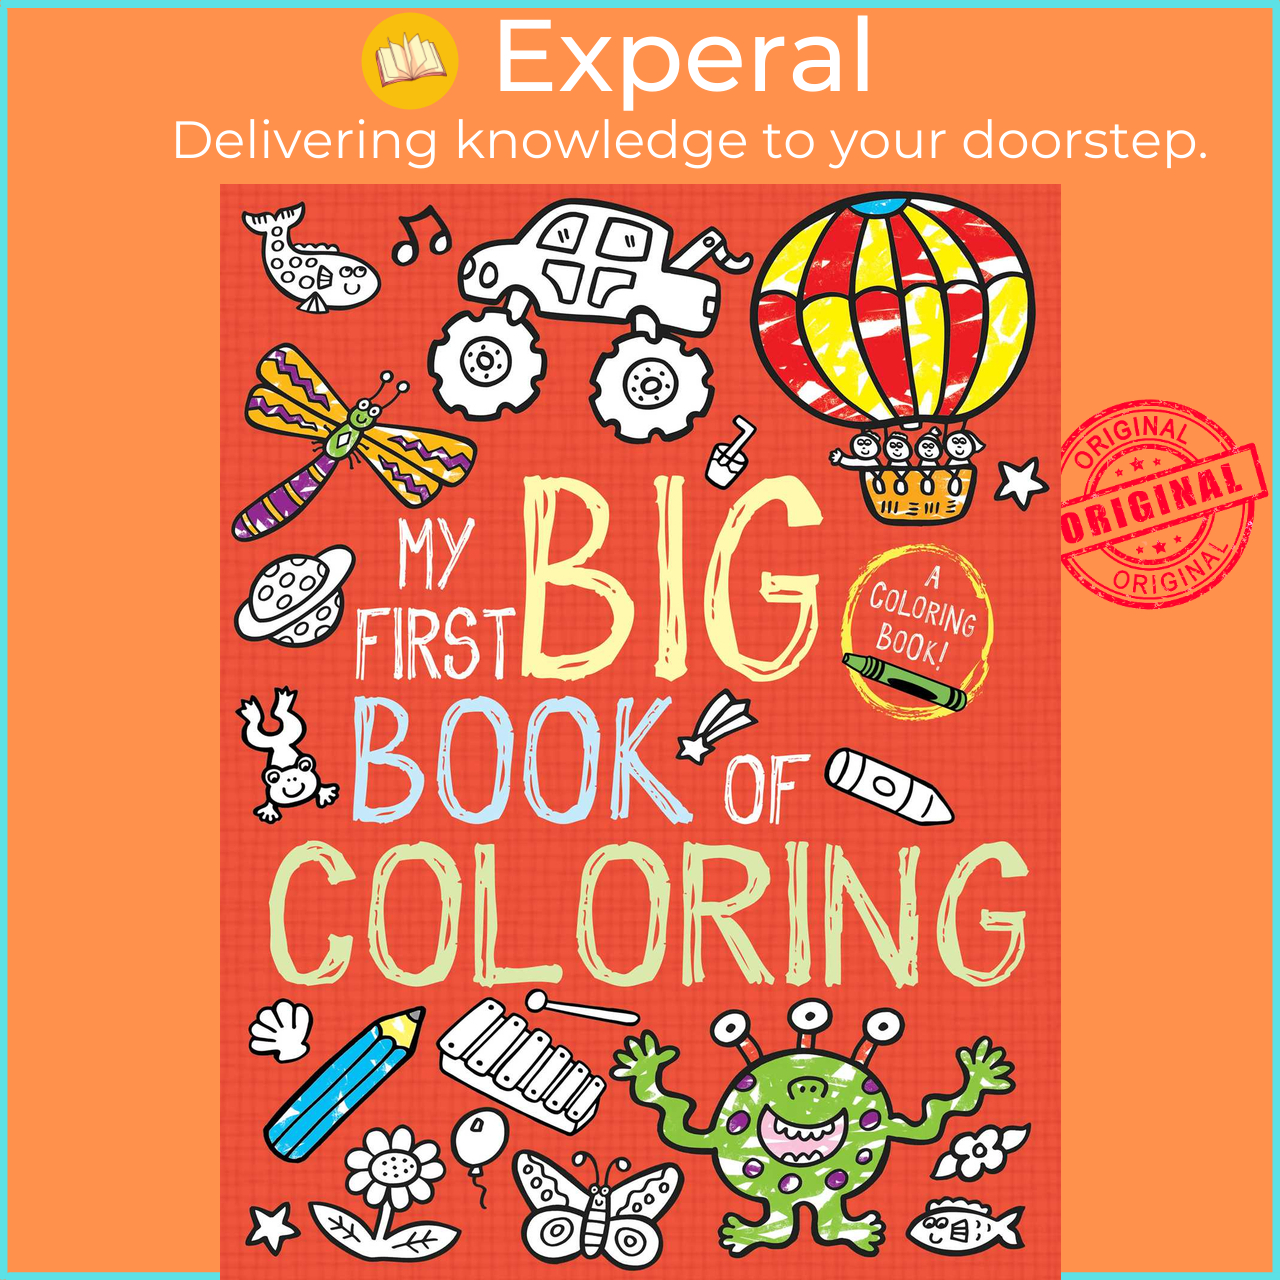 First　Coloring　Little　Lazada　My　(US　Book　paperback)　Books　edition,　of　Bee　by　Big　Singapore